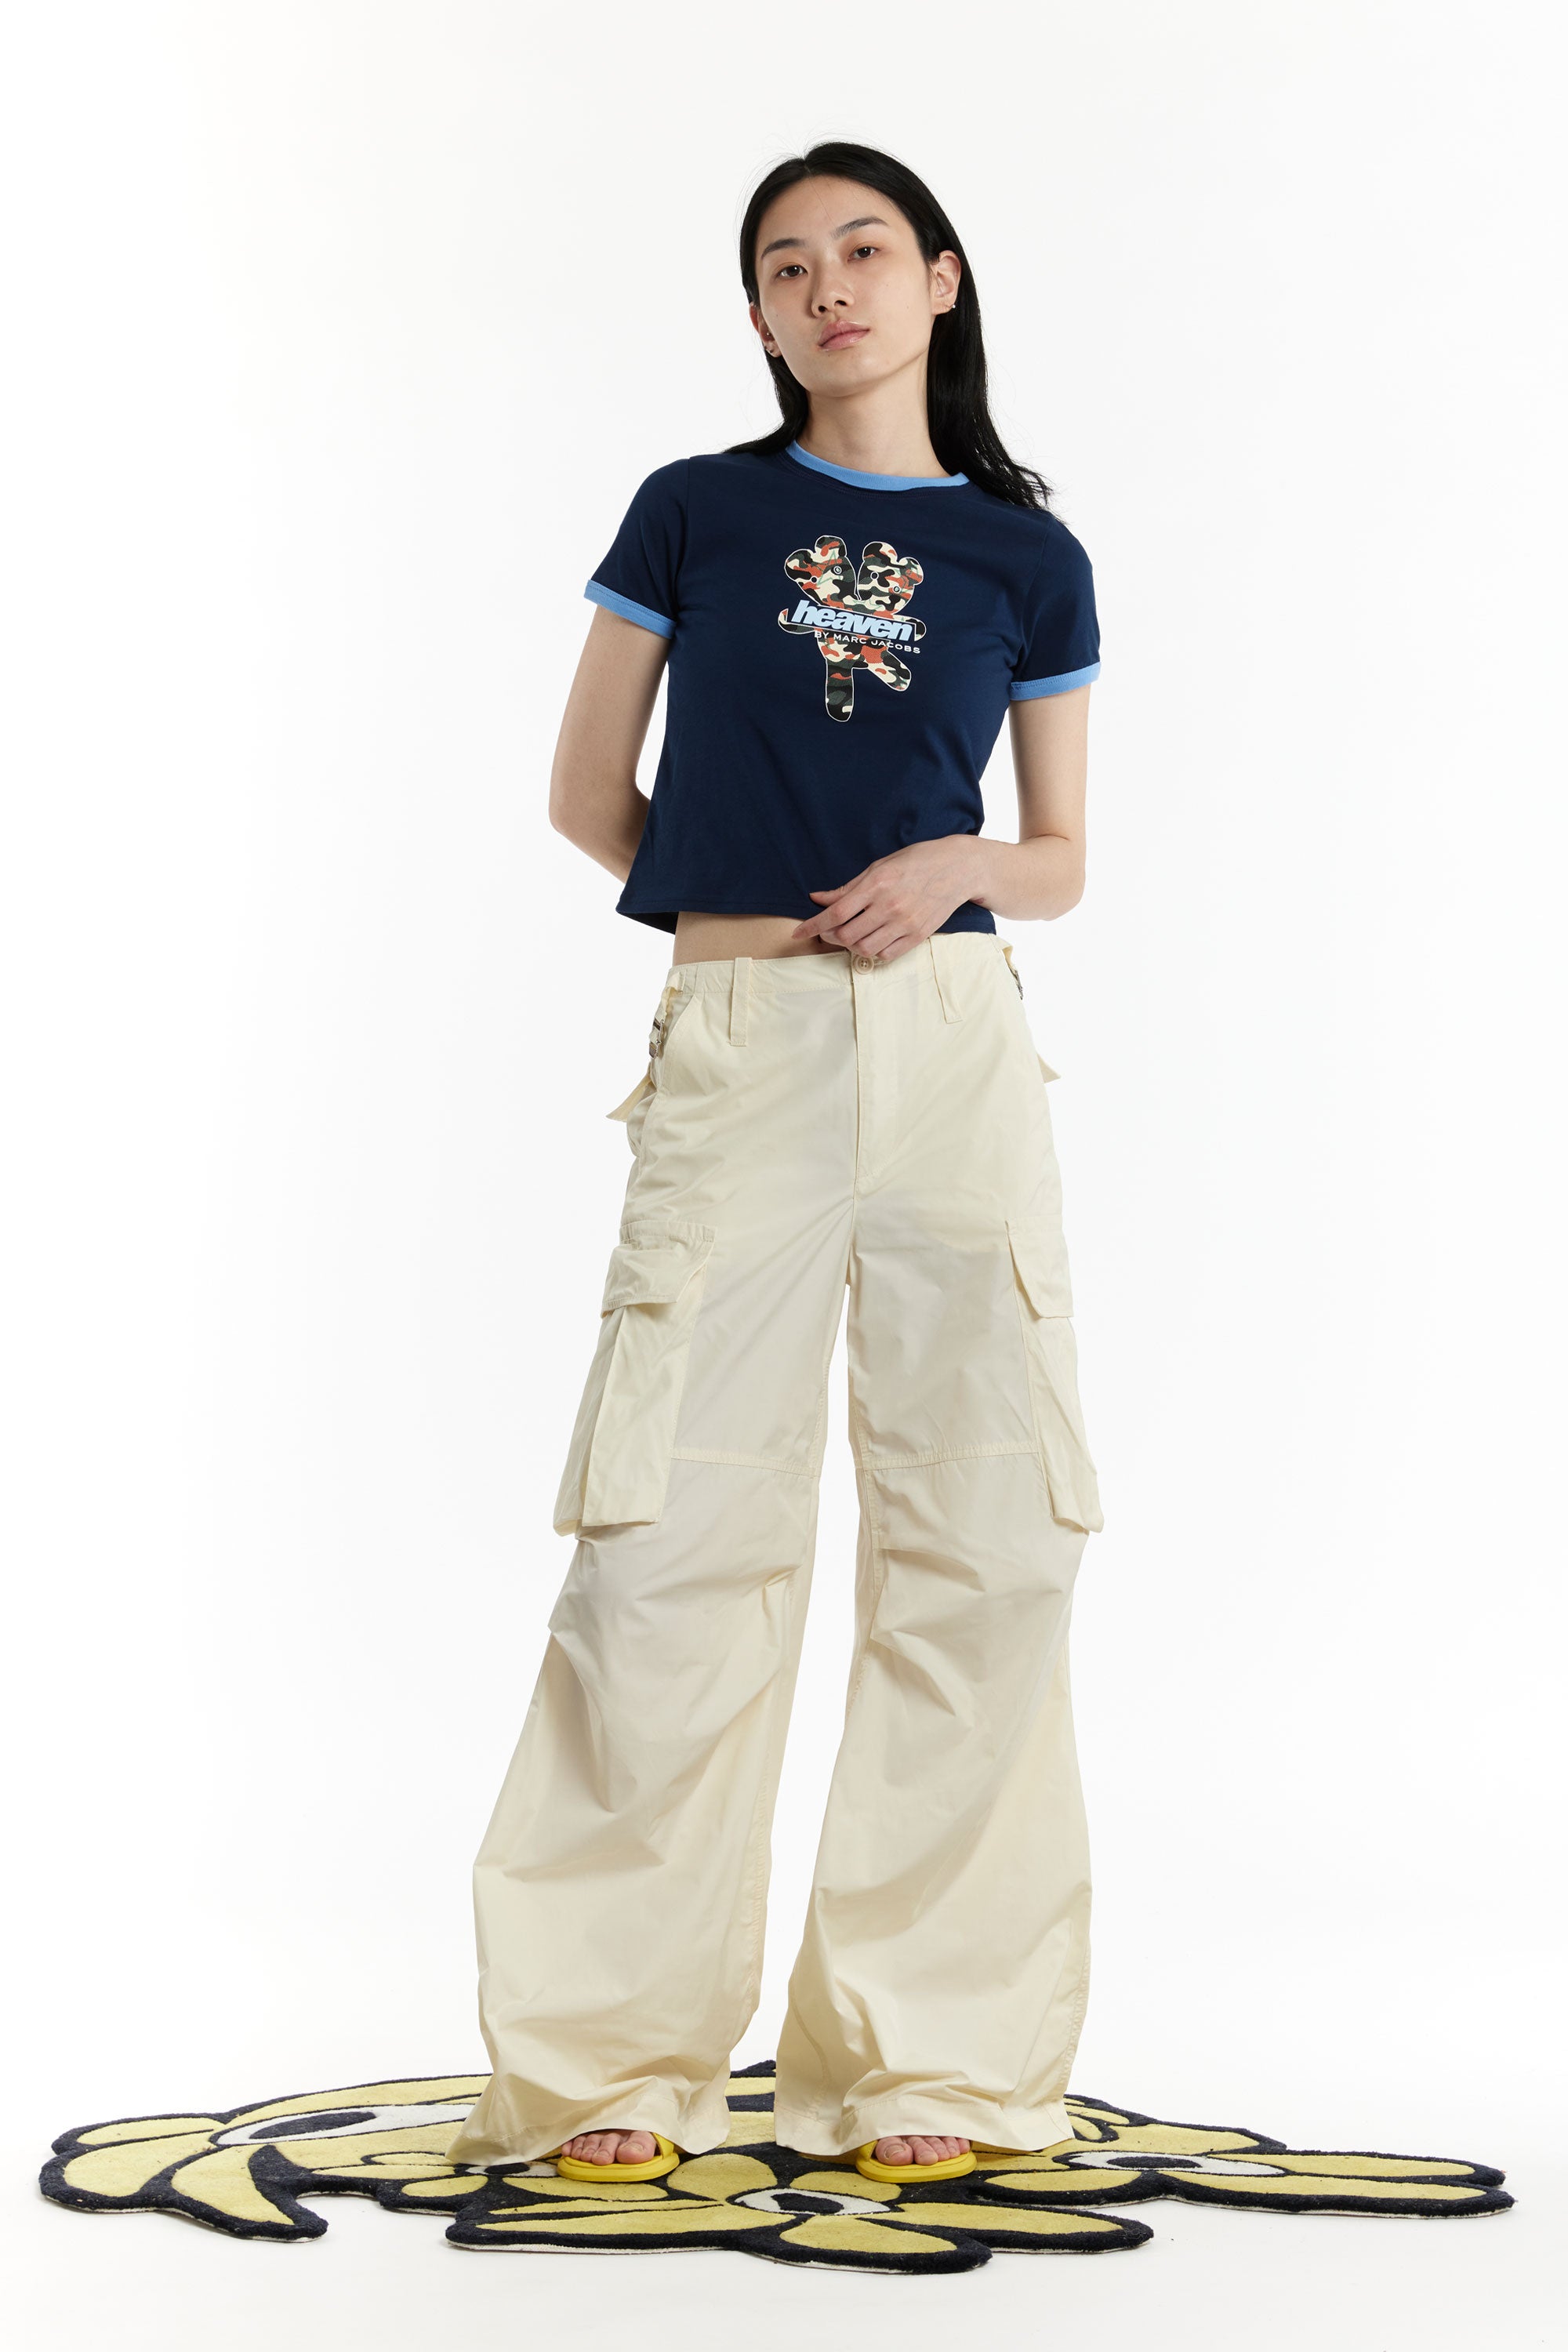 The HEAVEN - RUNWAY CARGO PANT  available online with global shipping, and in PAM Stores Melbourne and Sydney.